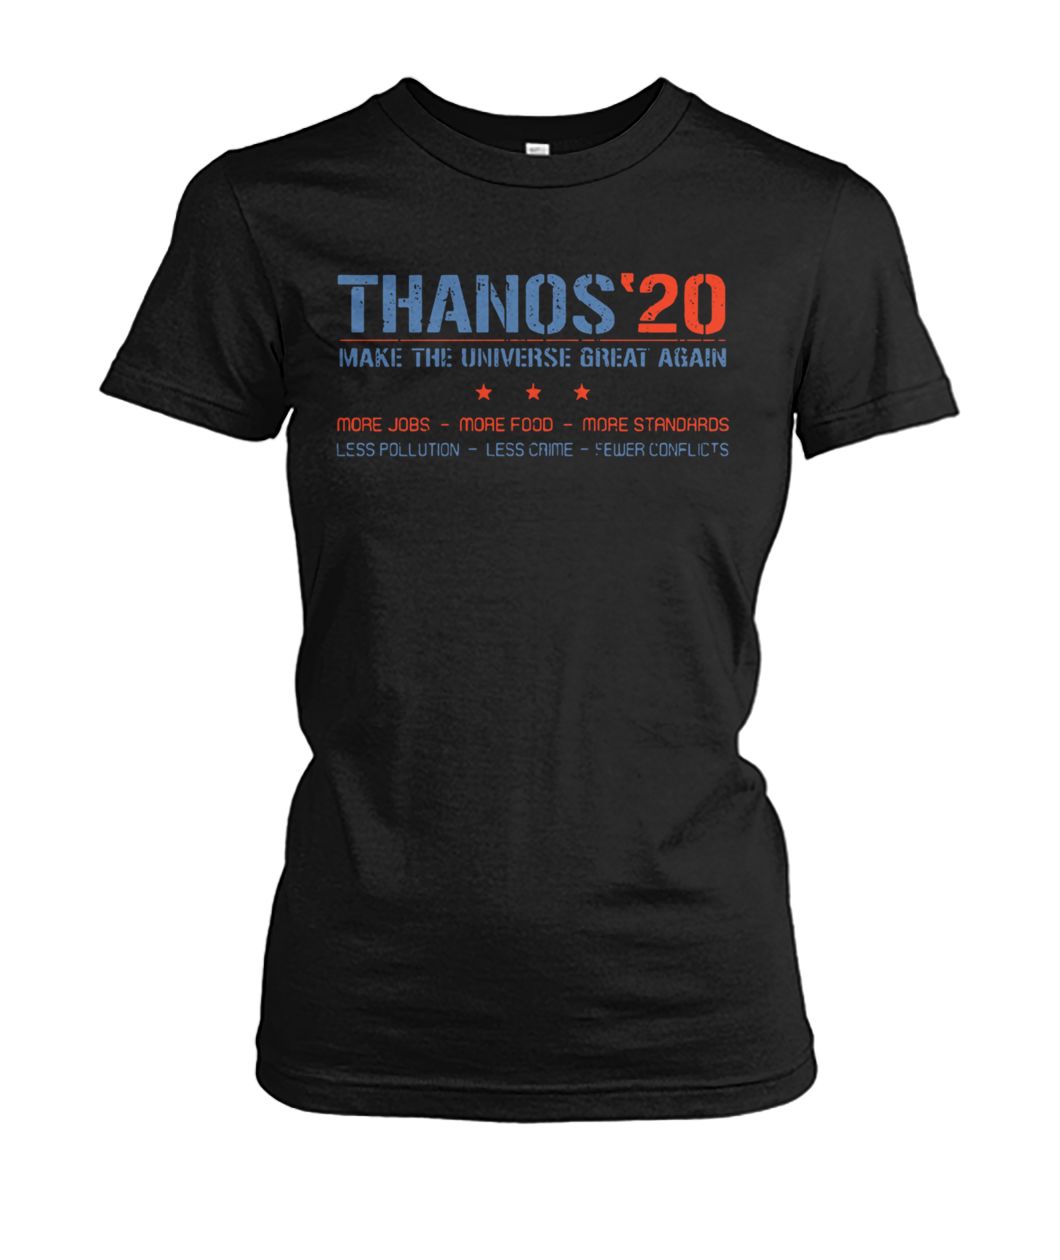 Thanos'20 make the universe great again more jobs more food more standards women's crew tee